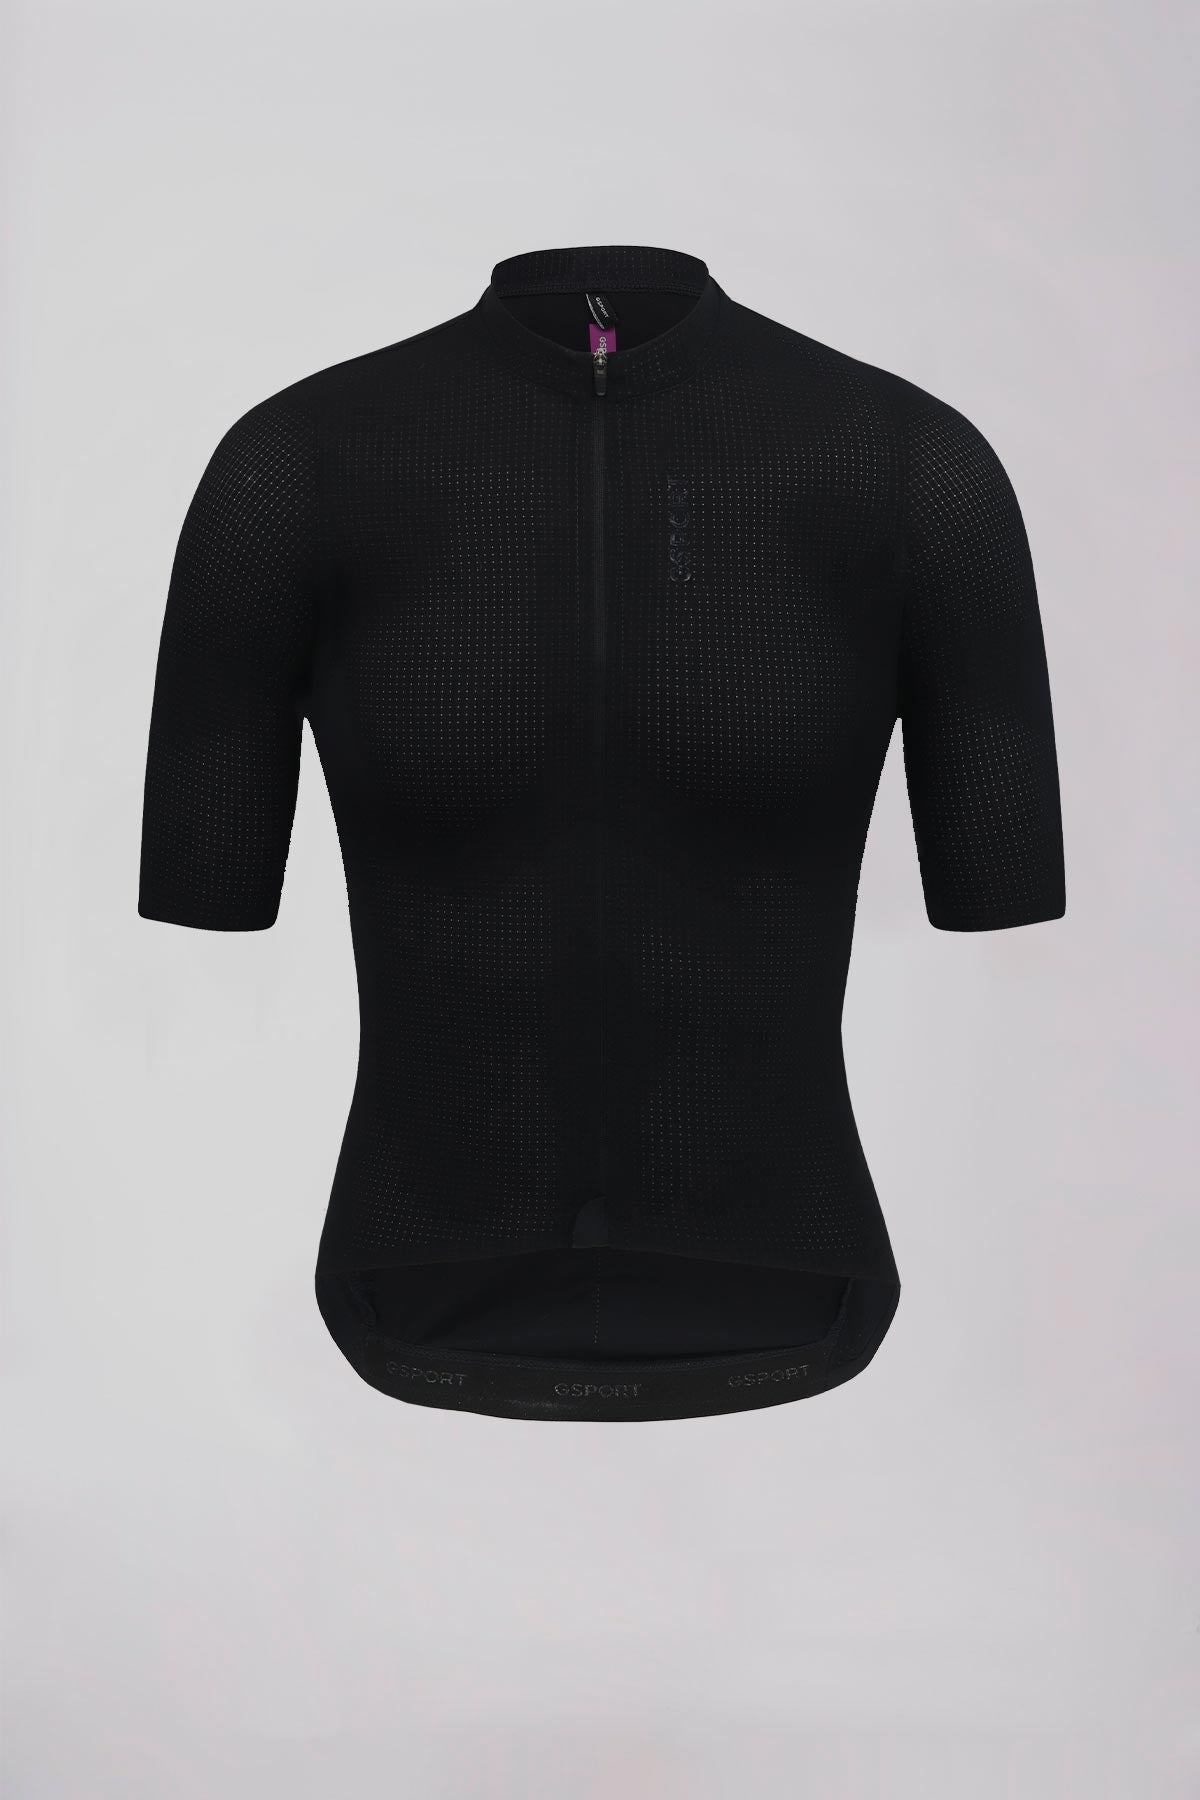 Camisola Pro Skin Carbon Mulher